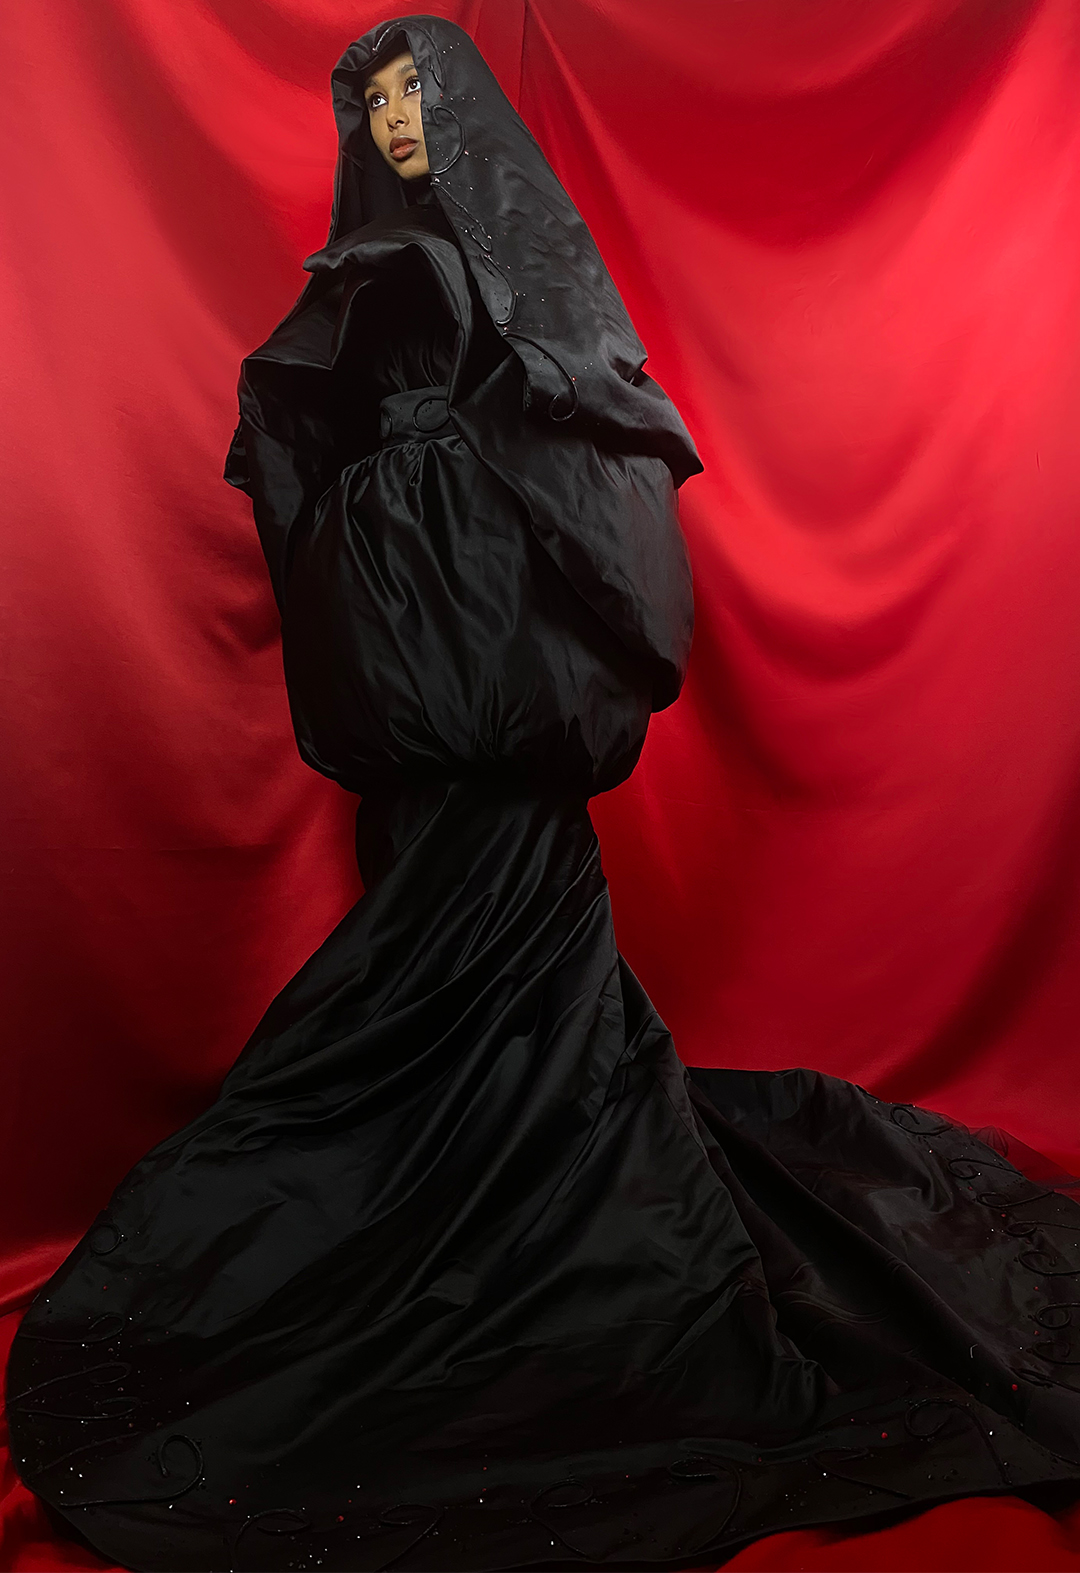 The image shows a front view of a hooded silhouette with the shimmering of hand-applied embellishments on display.